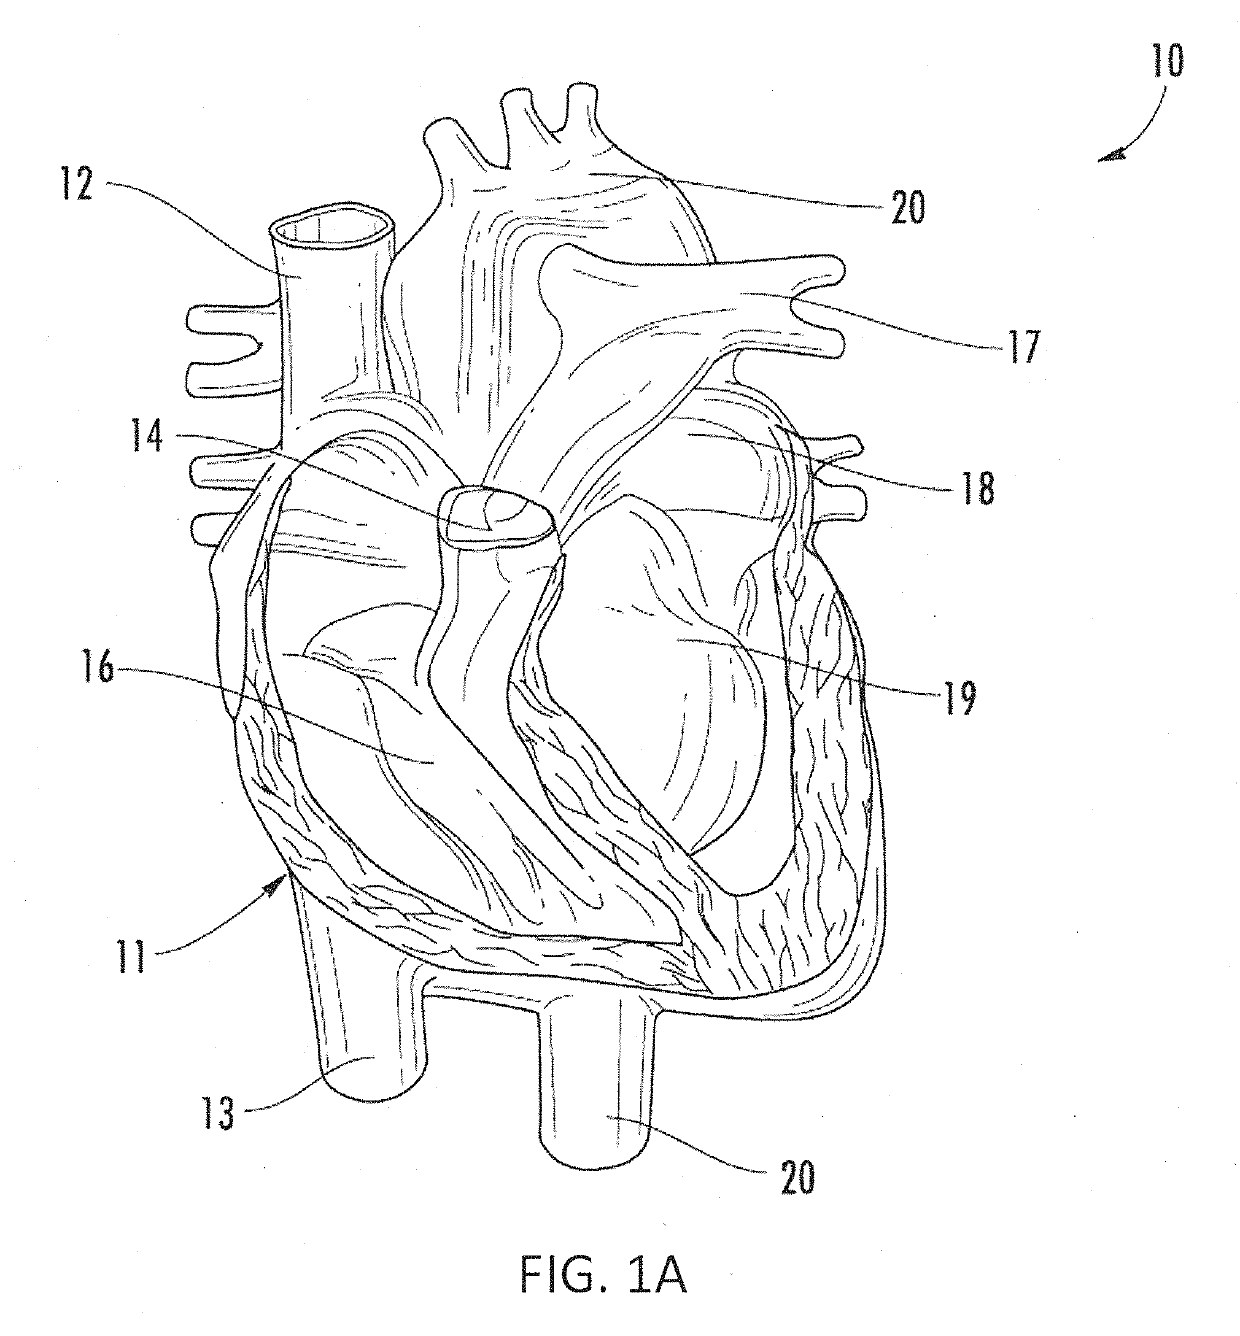 Systems and methods for selectively occluding the superior vena cava for treating heart conditions